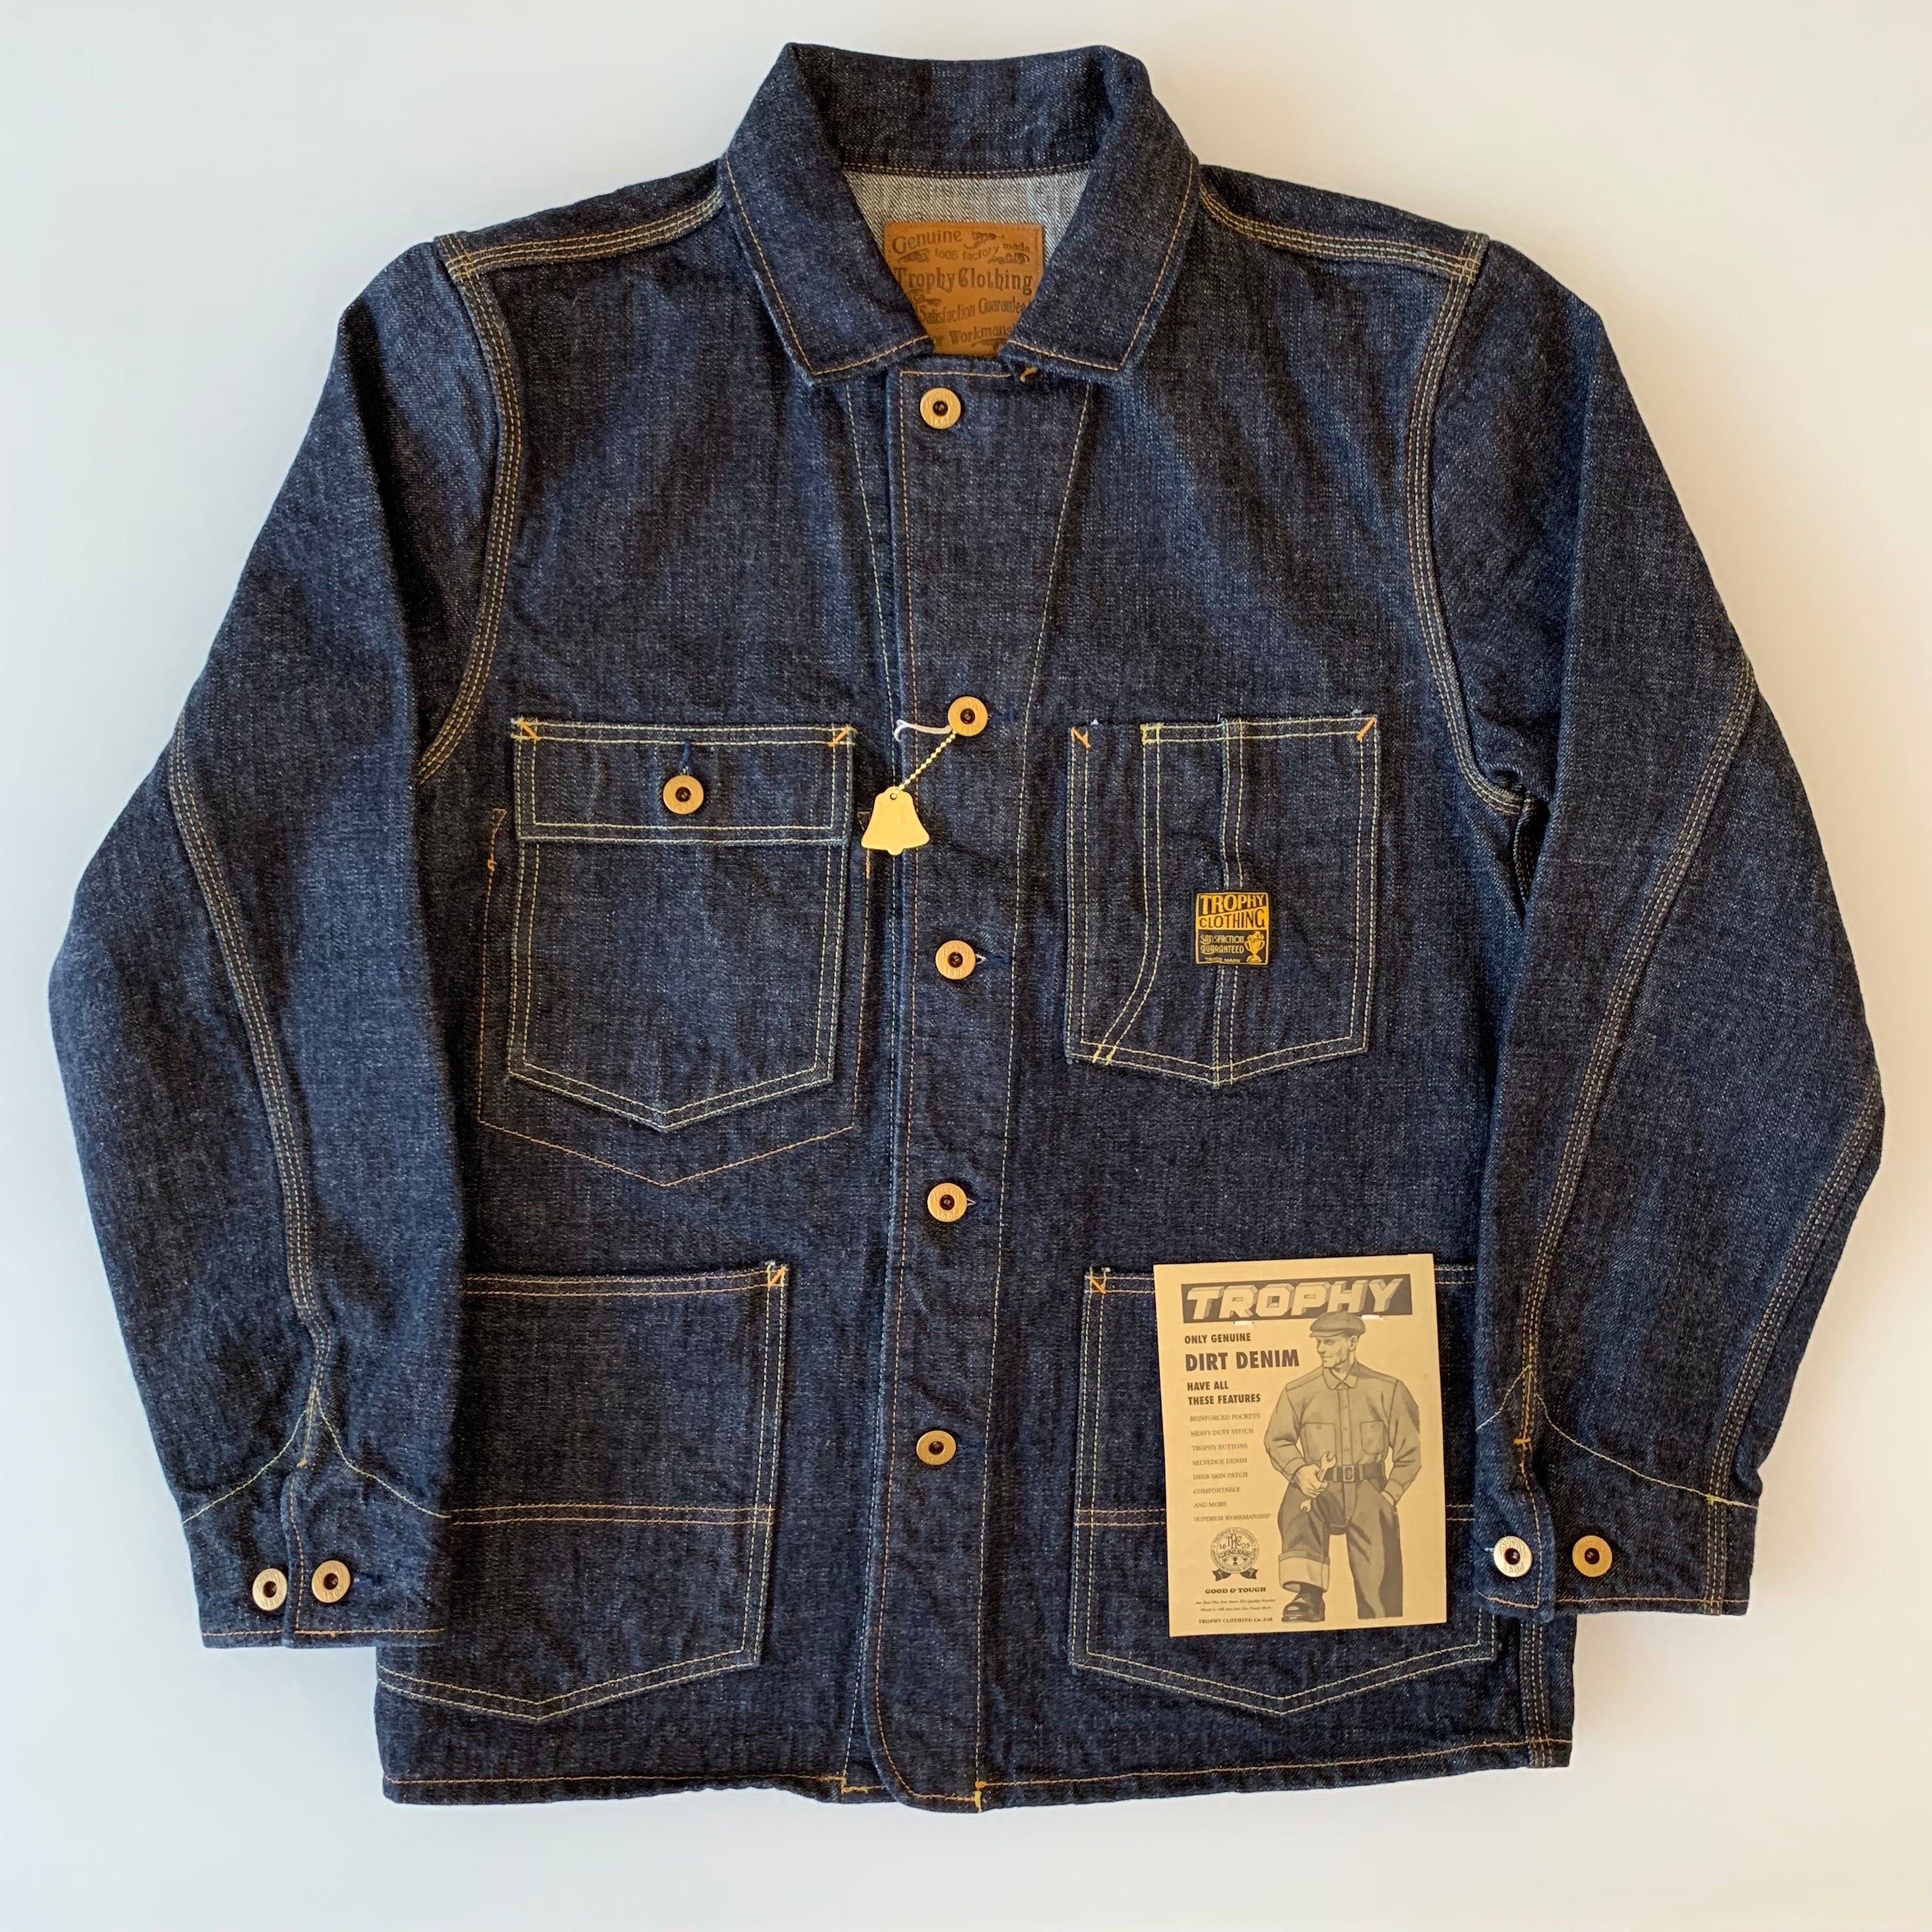 TROPHY CLOTHING - 2604 Dirt Denim Coverall at TEMPO Design Store